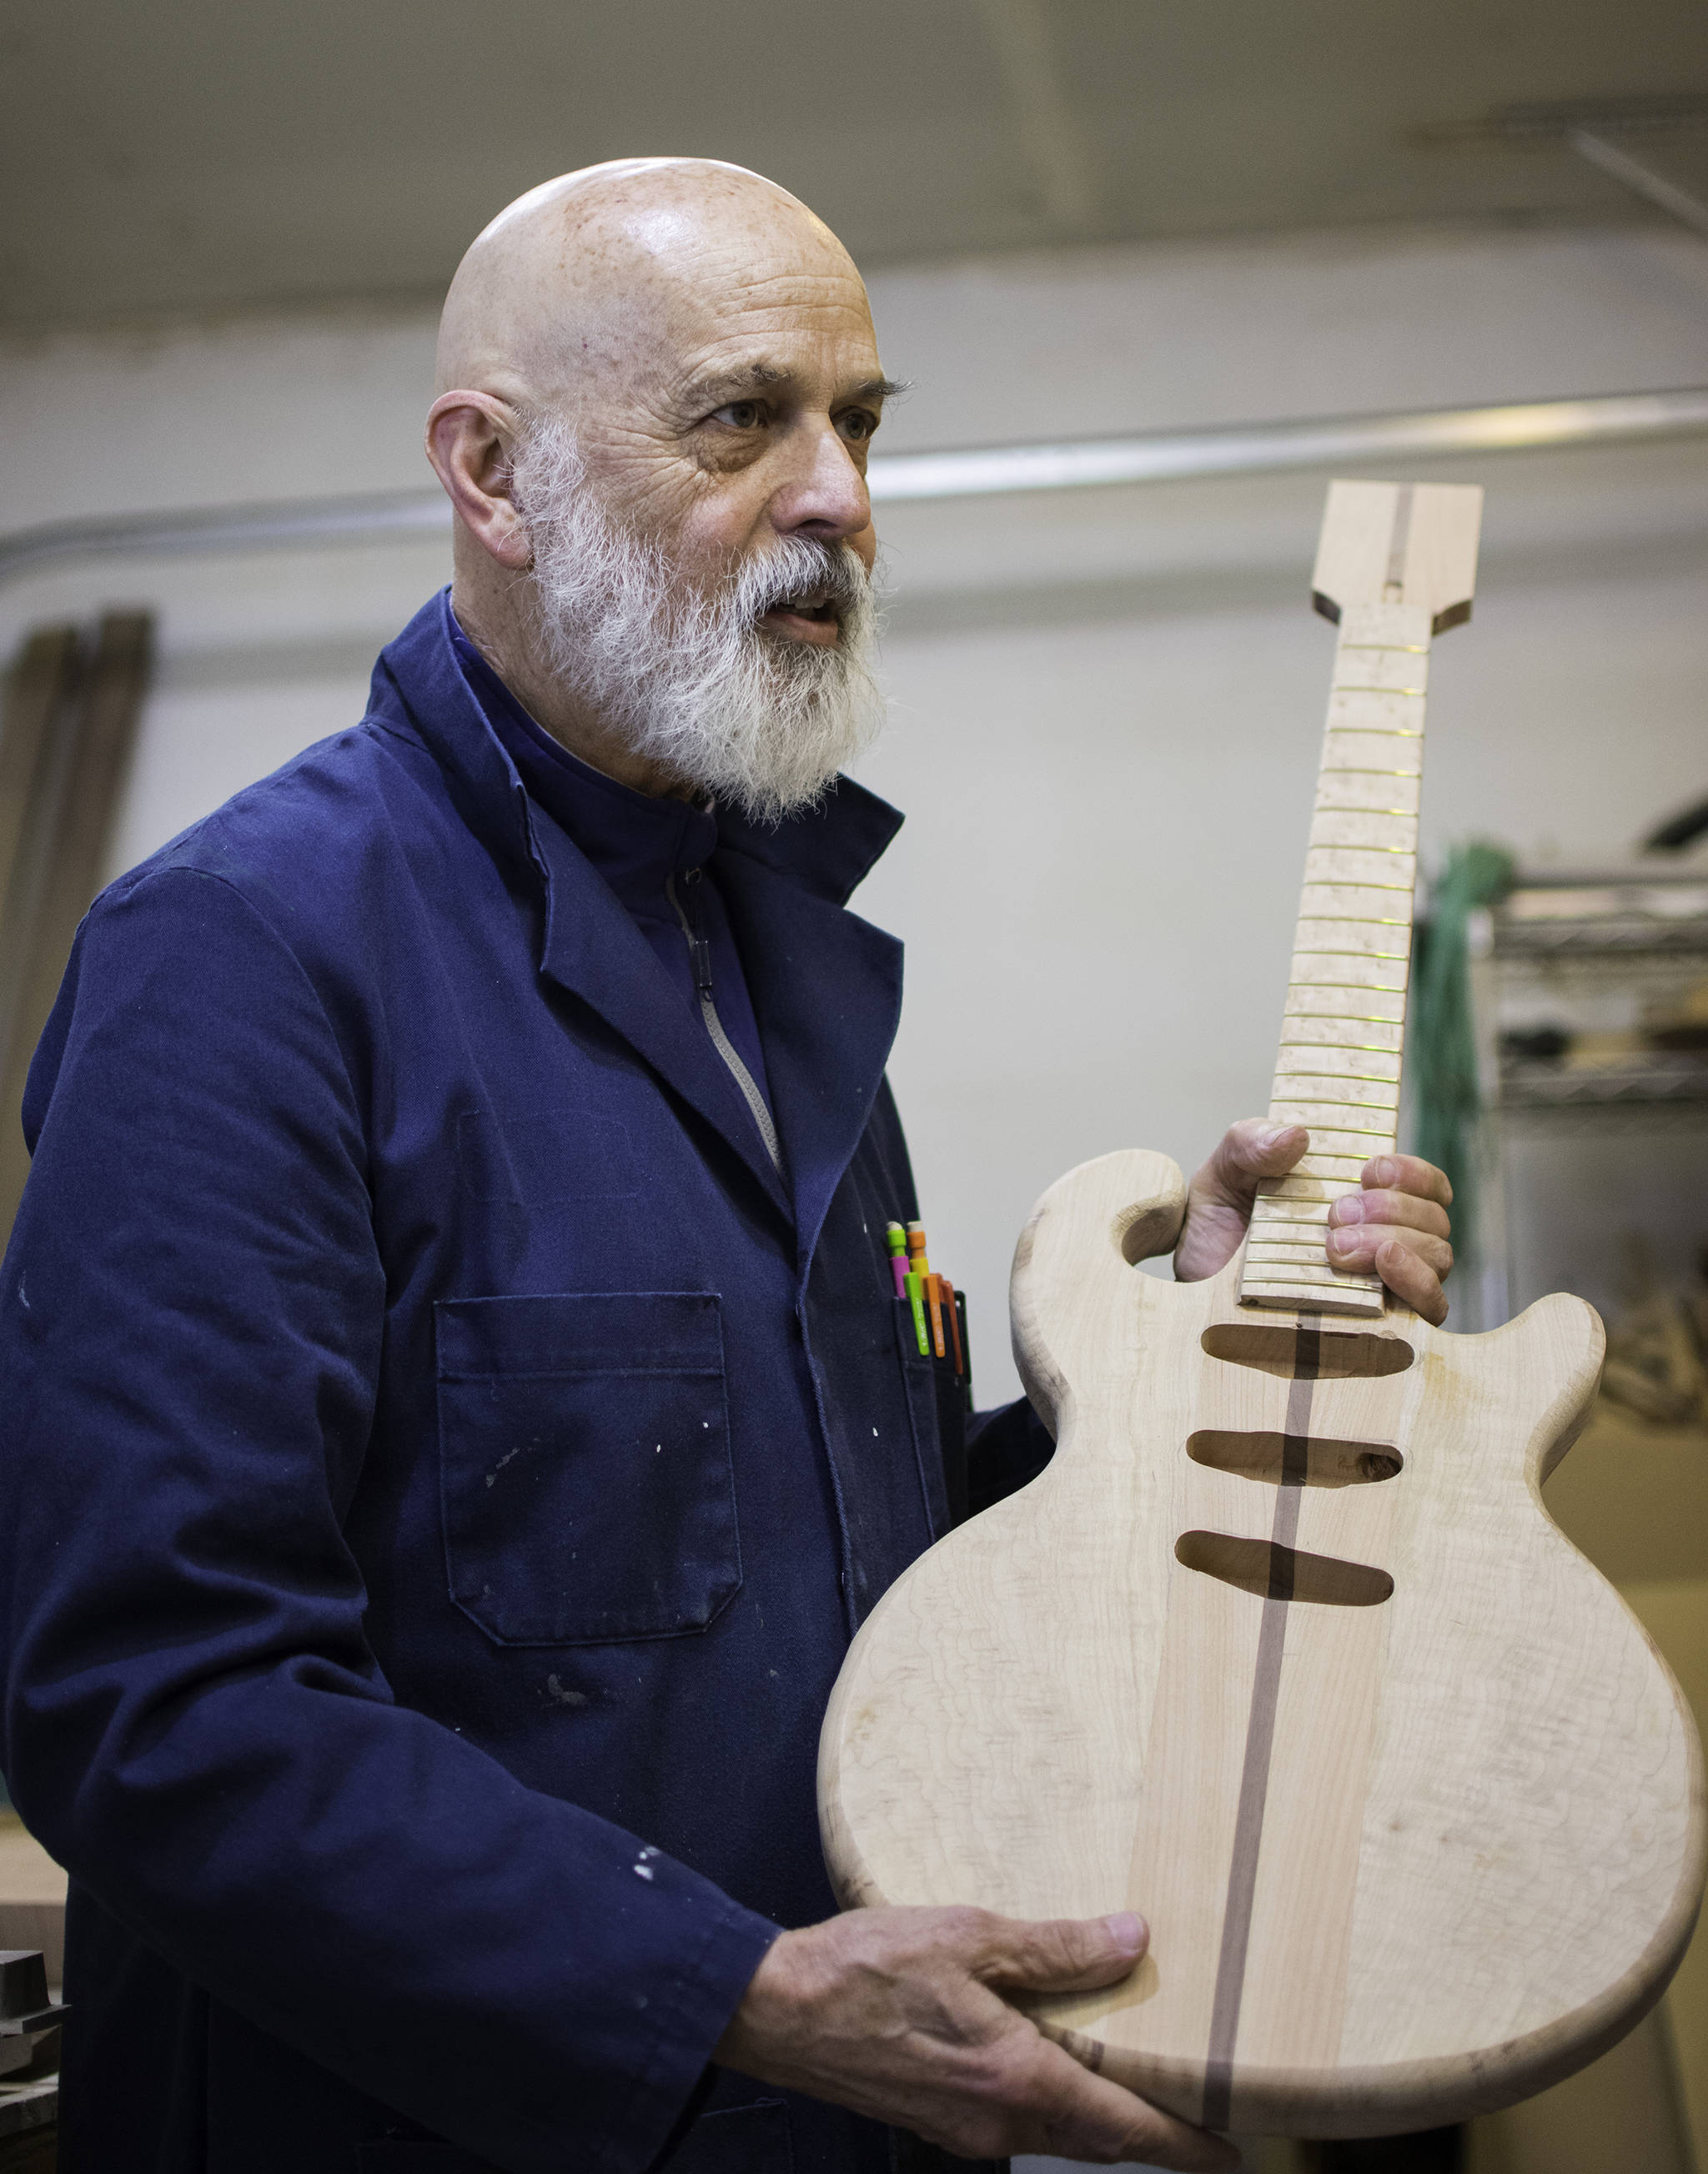 George Gress holds up a work in progress—a solid body electric guitar made of California redwood—at his Juneau workshop on Tuesday, March 27, 2018. Richard McGrail | For the Capital City Weekly